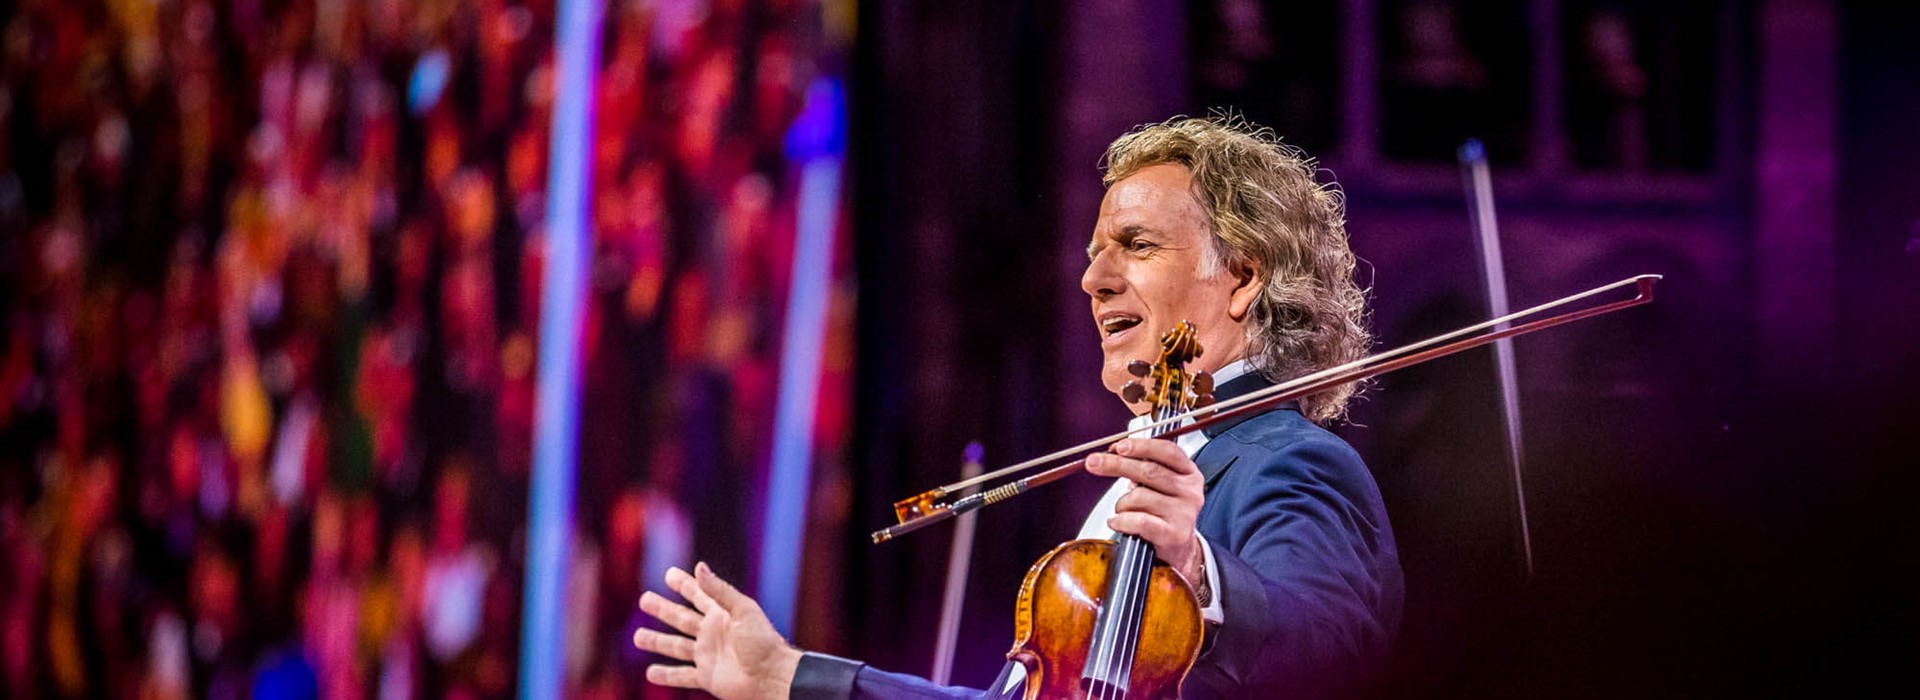 tourhub | Newmarket Holidays | Andre Rieu in Maastricht by Air - 3 days 